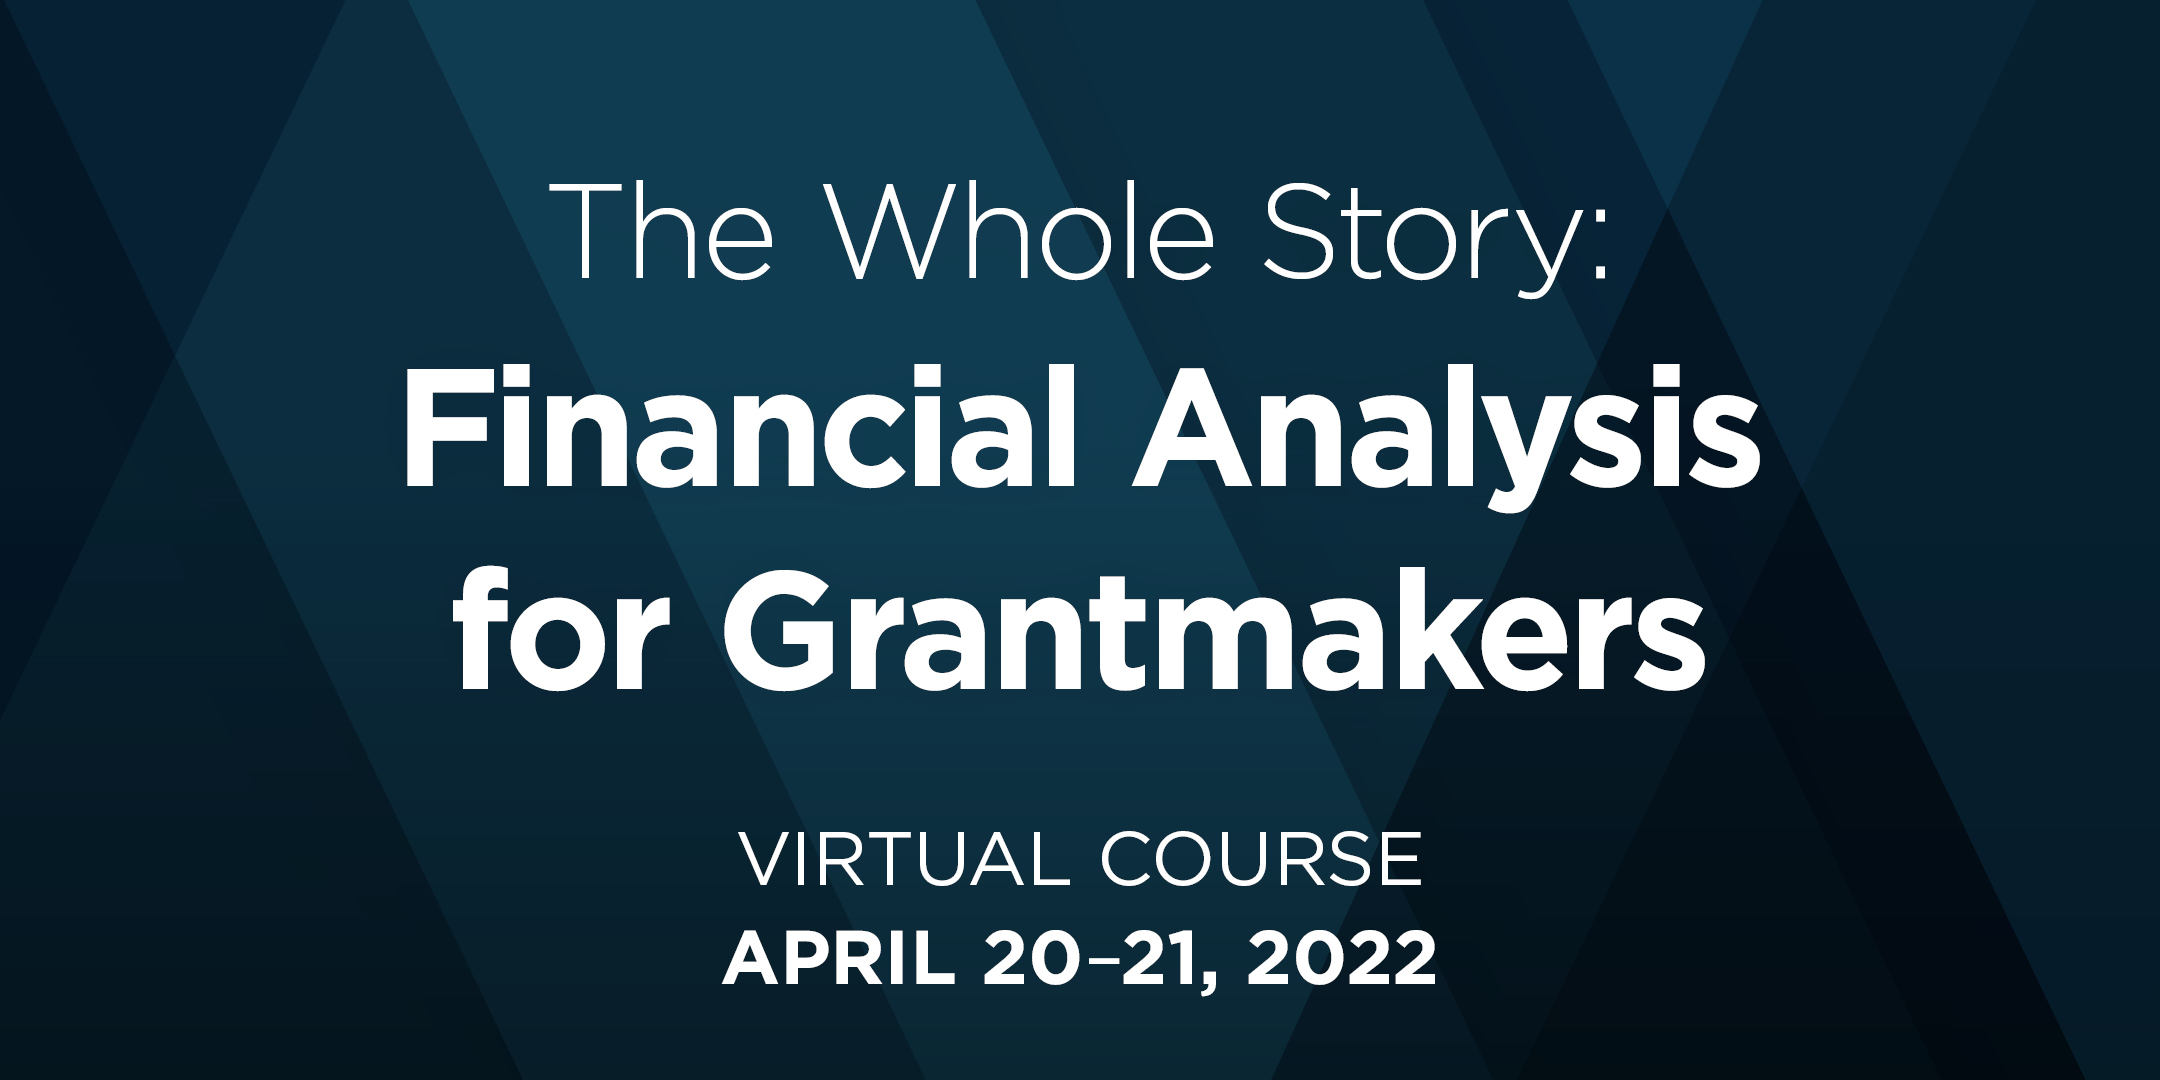 The Whole Story: Financial Analysis for Grantmakers